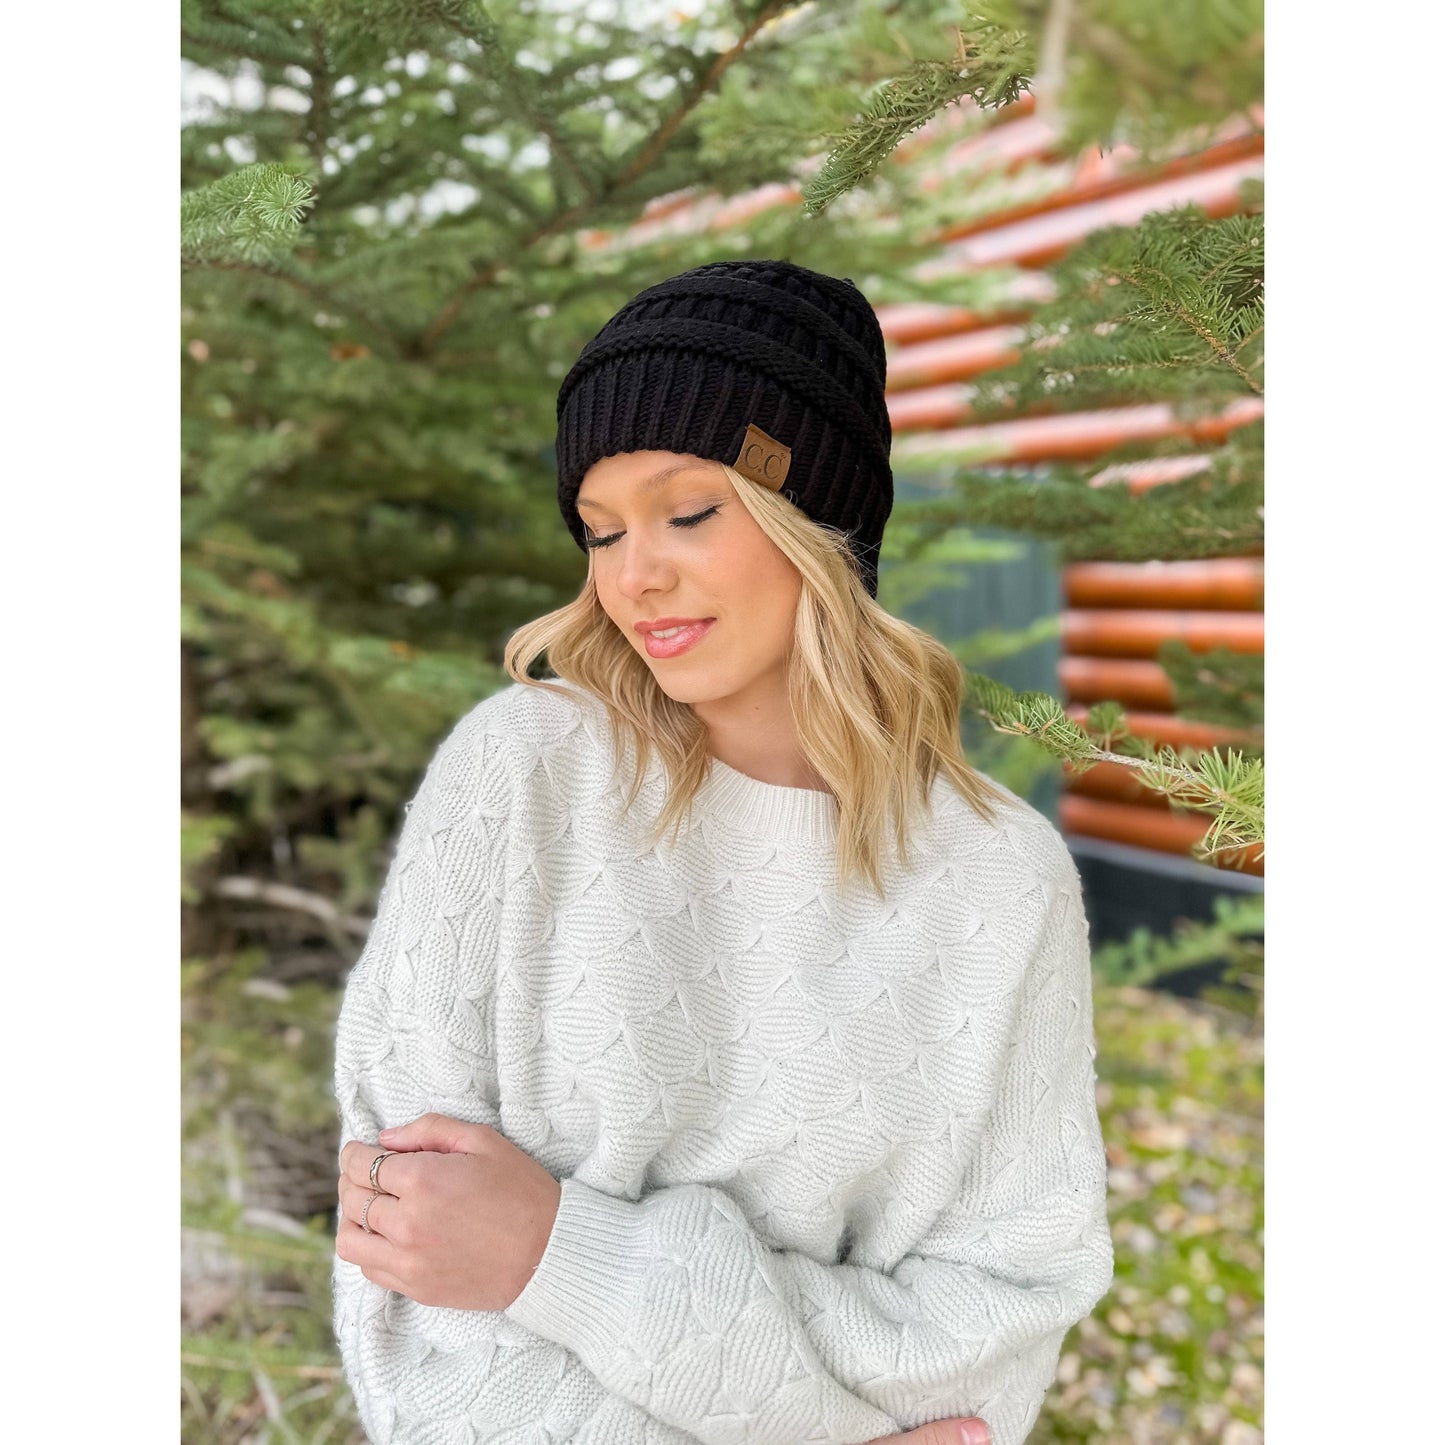 Classic Fuzzy Lined CC Beanie HAT25: Taupe